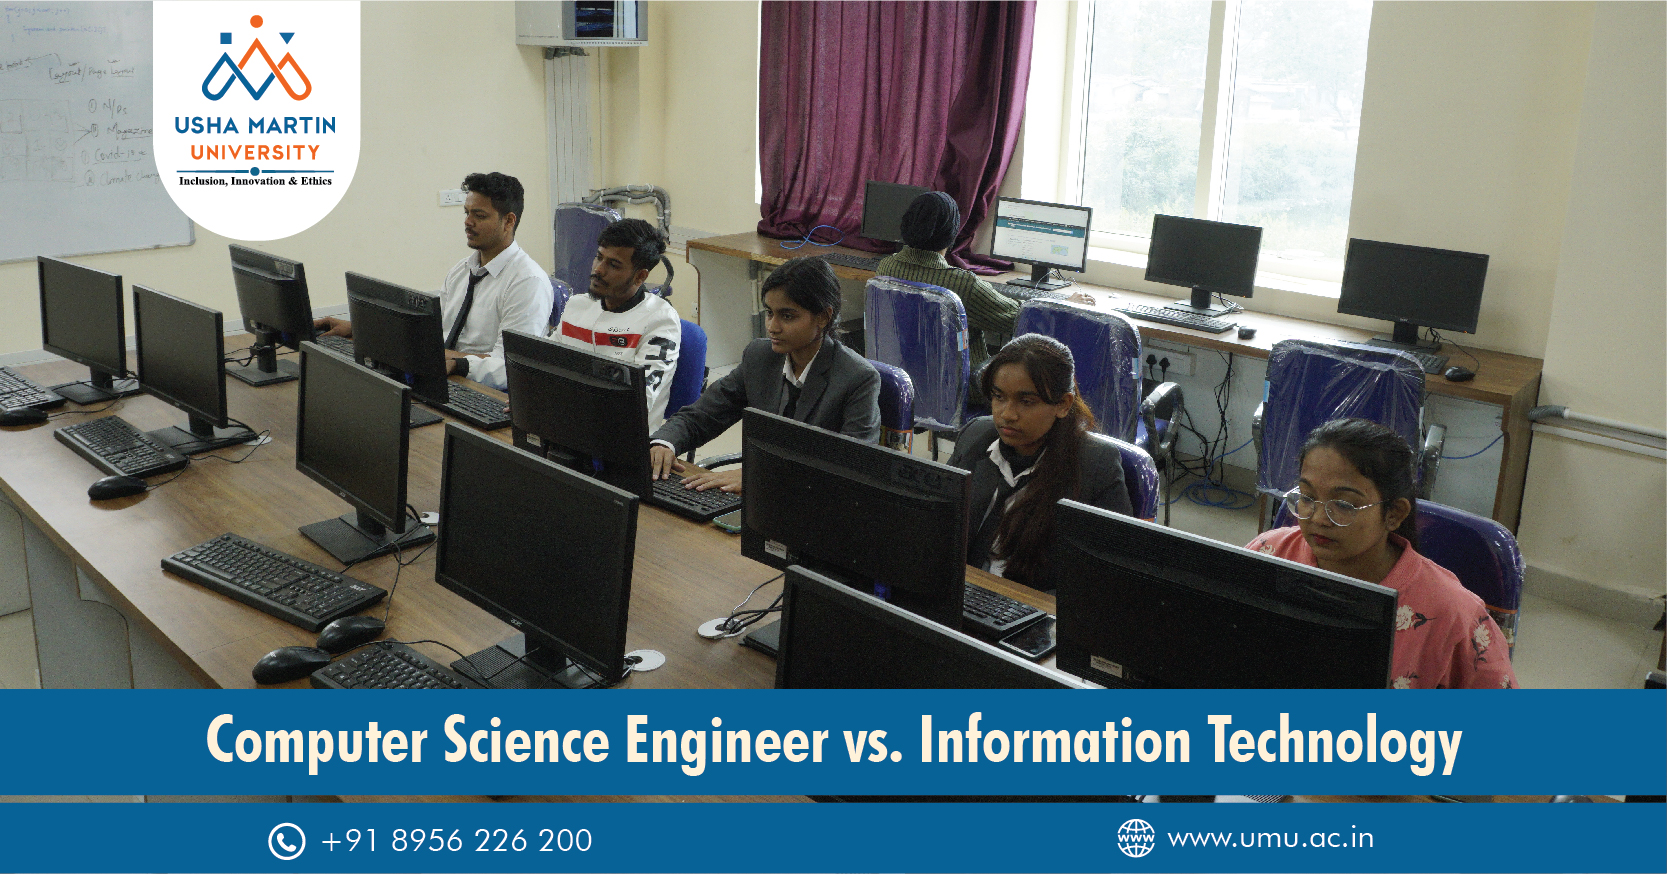 Computer Science Engineer vs. Information Technology